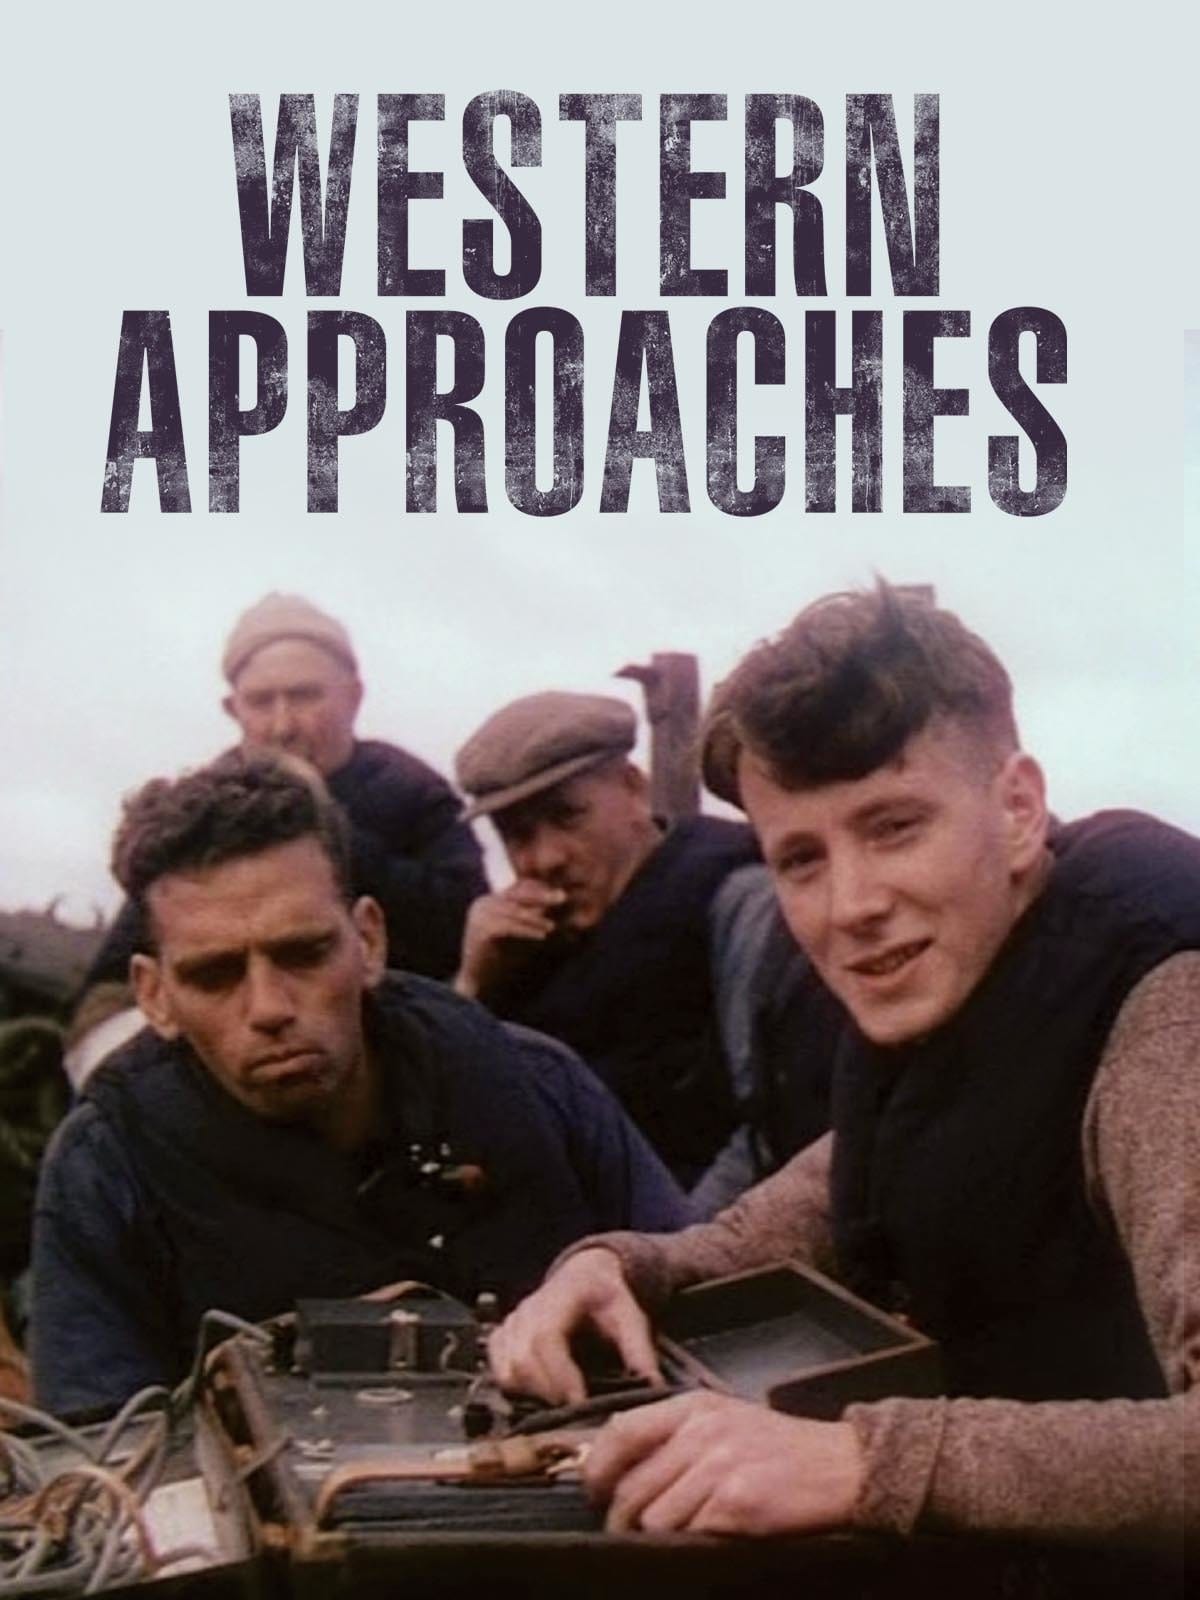 Western Approaches